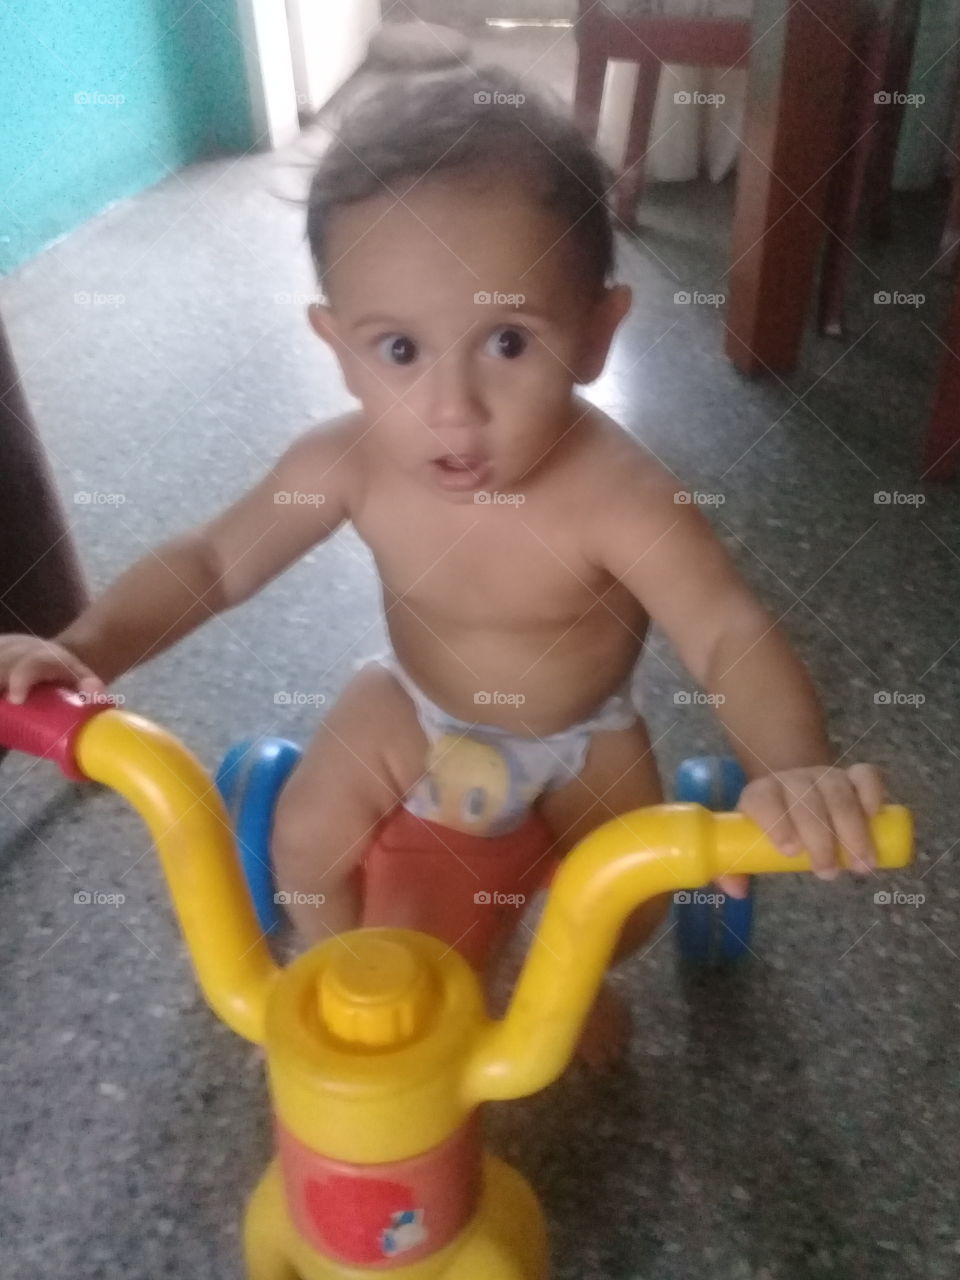 baby riding tricycle